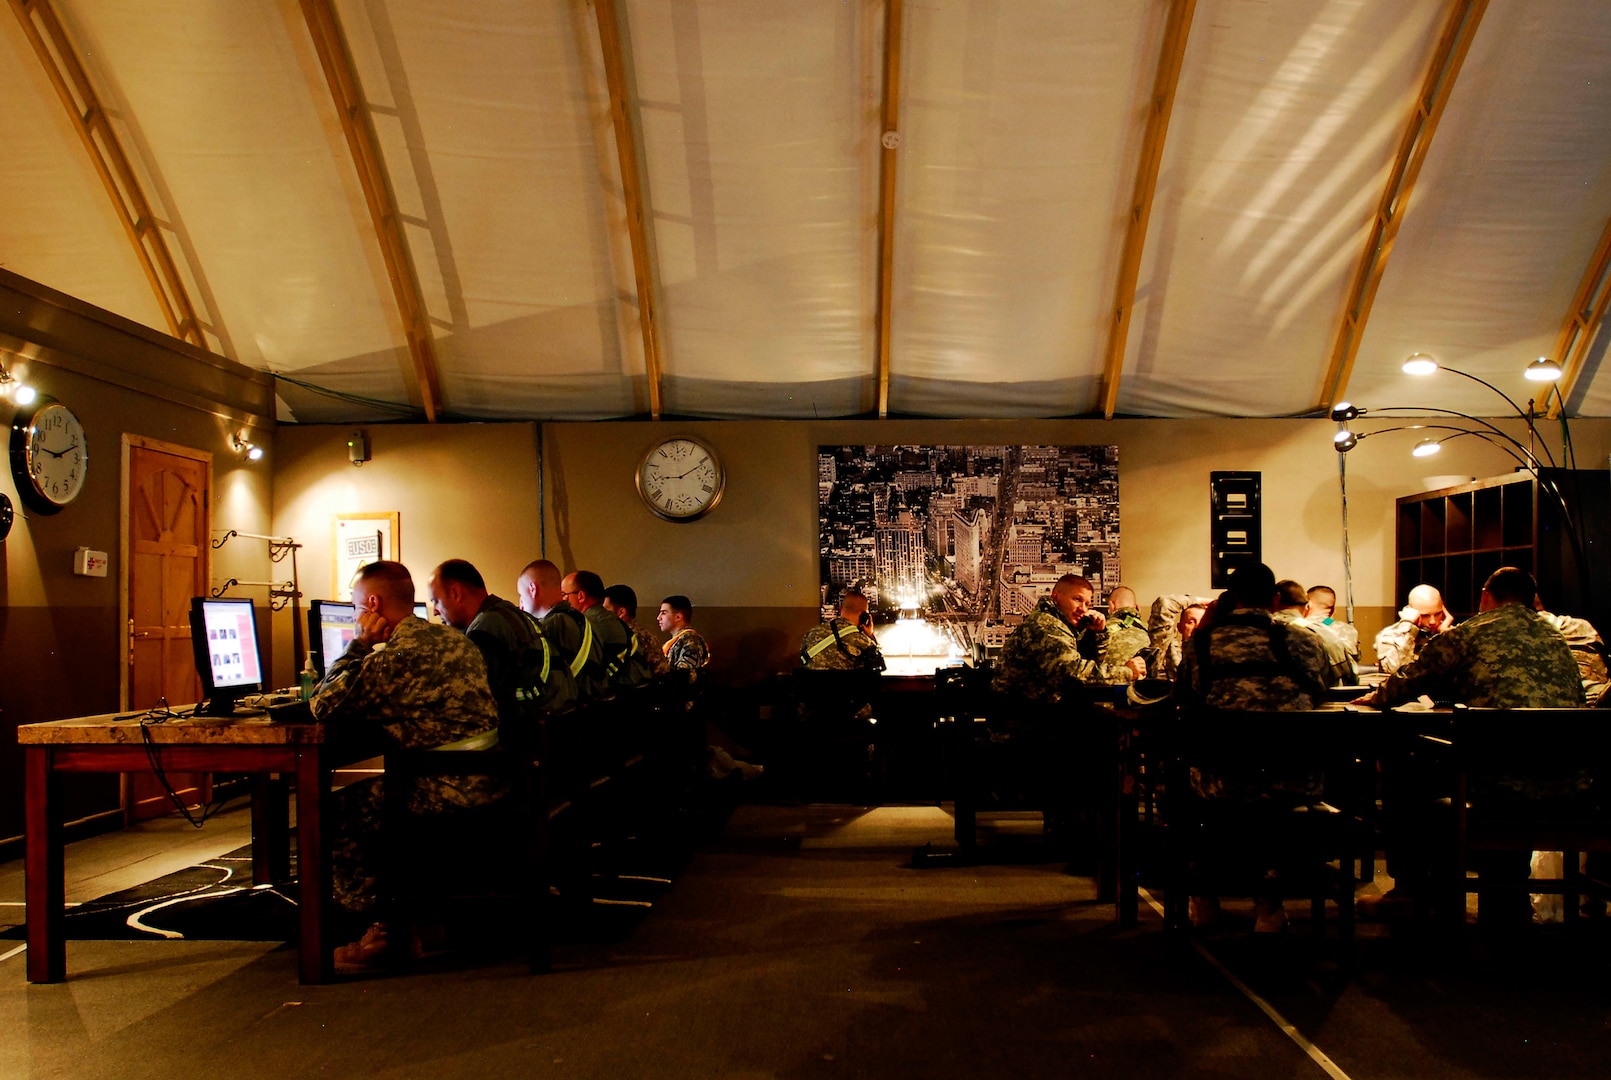 Soldiers enjoy down time while catching up with family and friends at the USO within Camp Virginia, Kuwait. The complex at the camp includes computers, telephones, video games, television sets, a movie theater and a "United Through Reading" room.